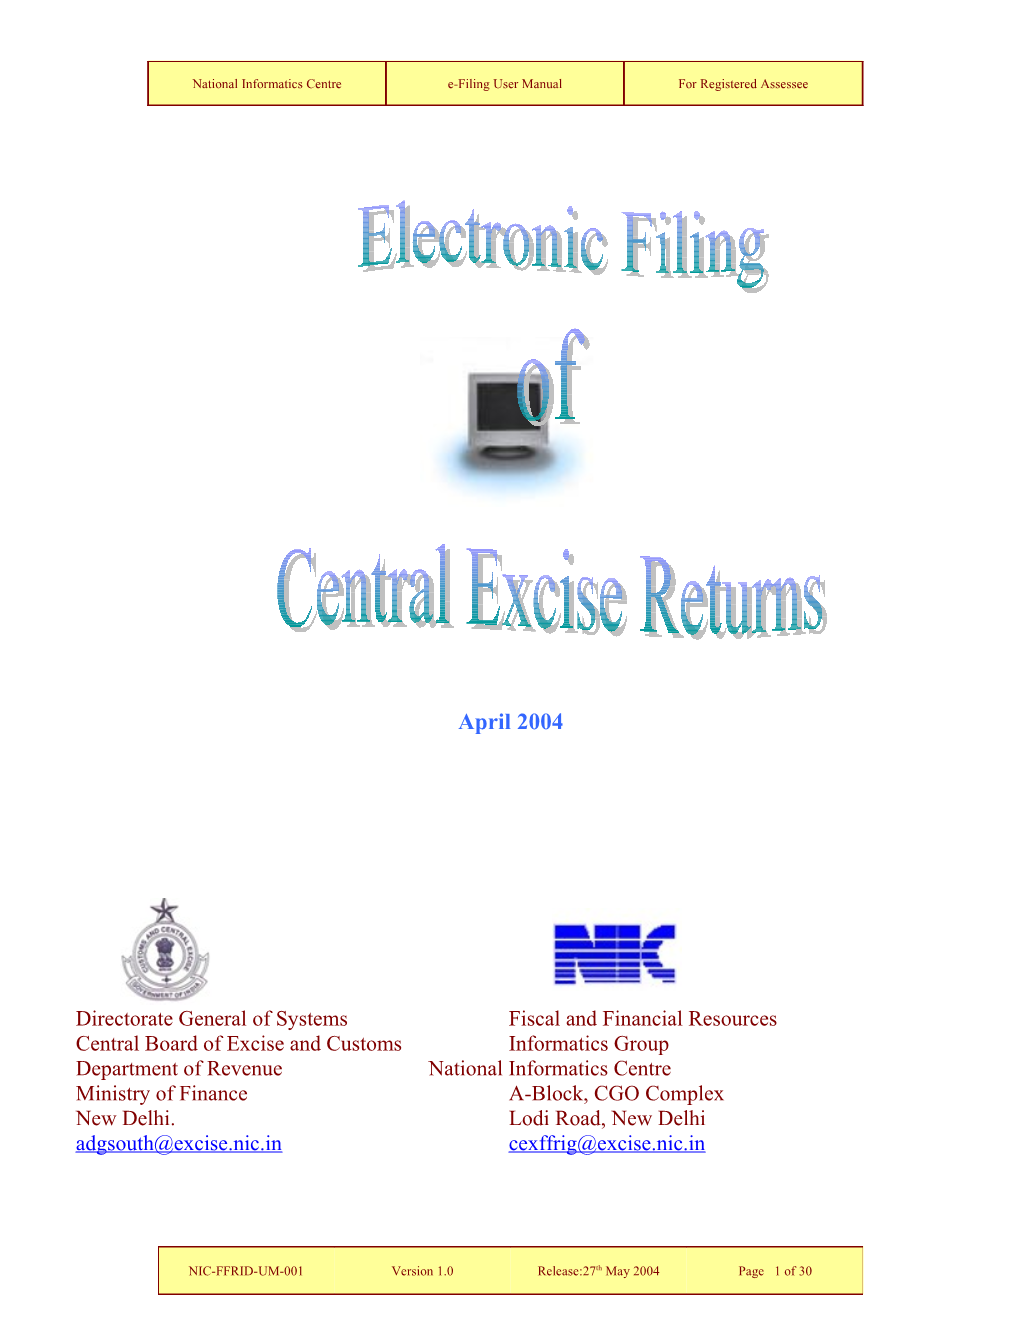 Electrnic Filing of Central Excise Return